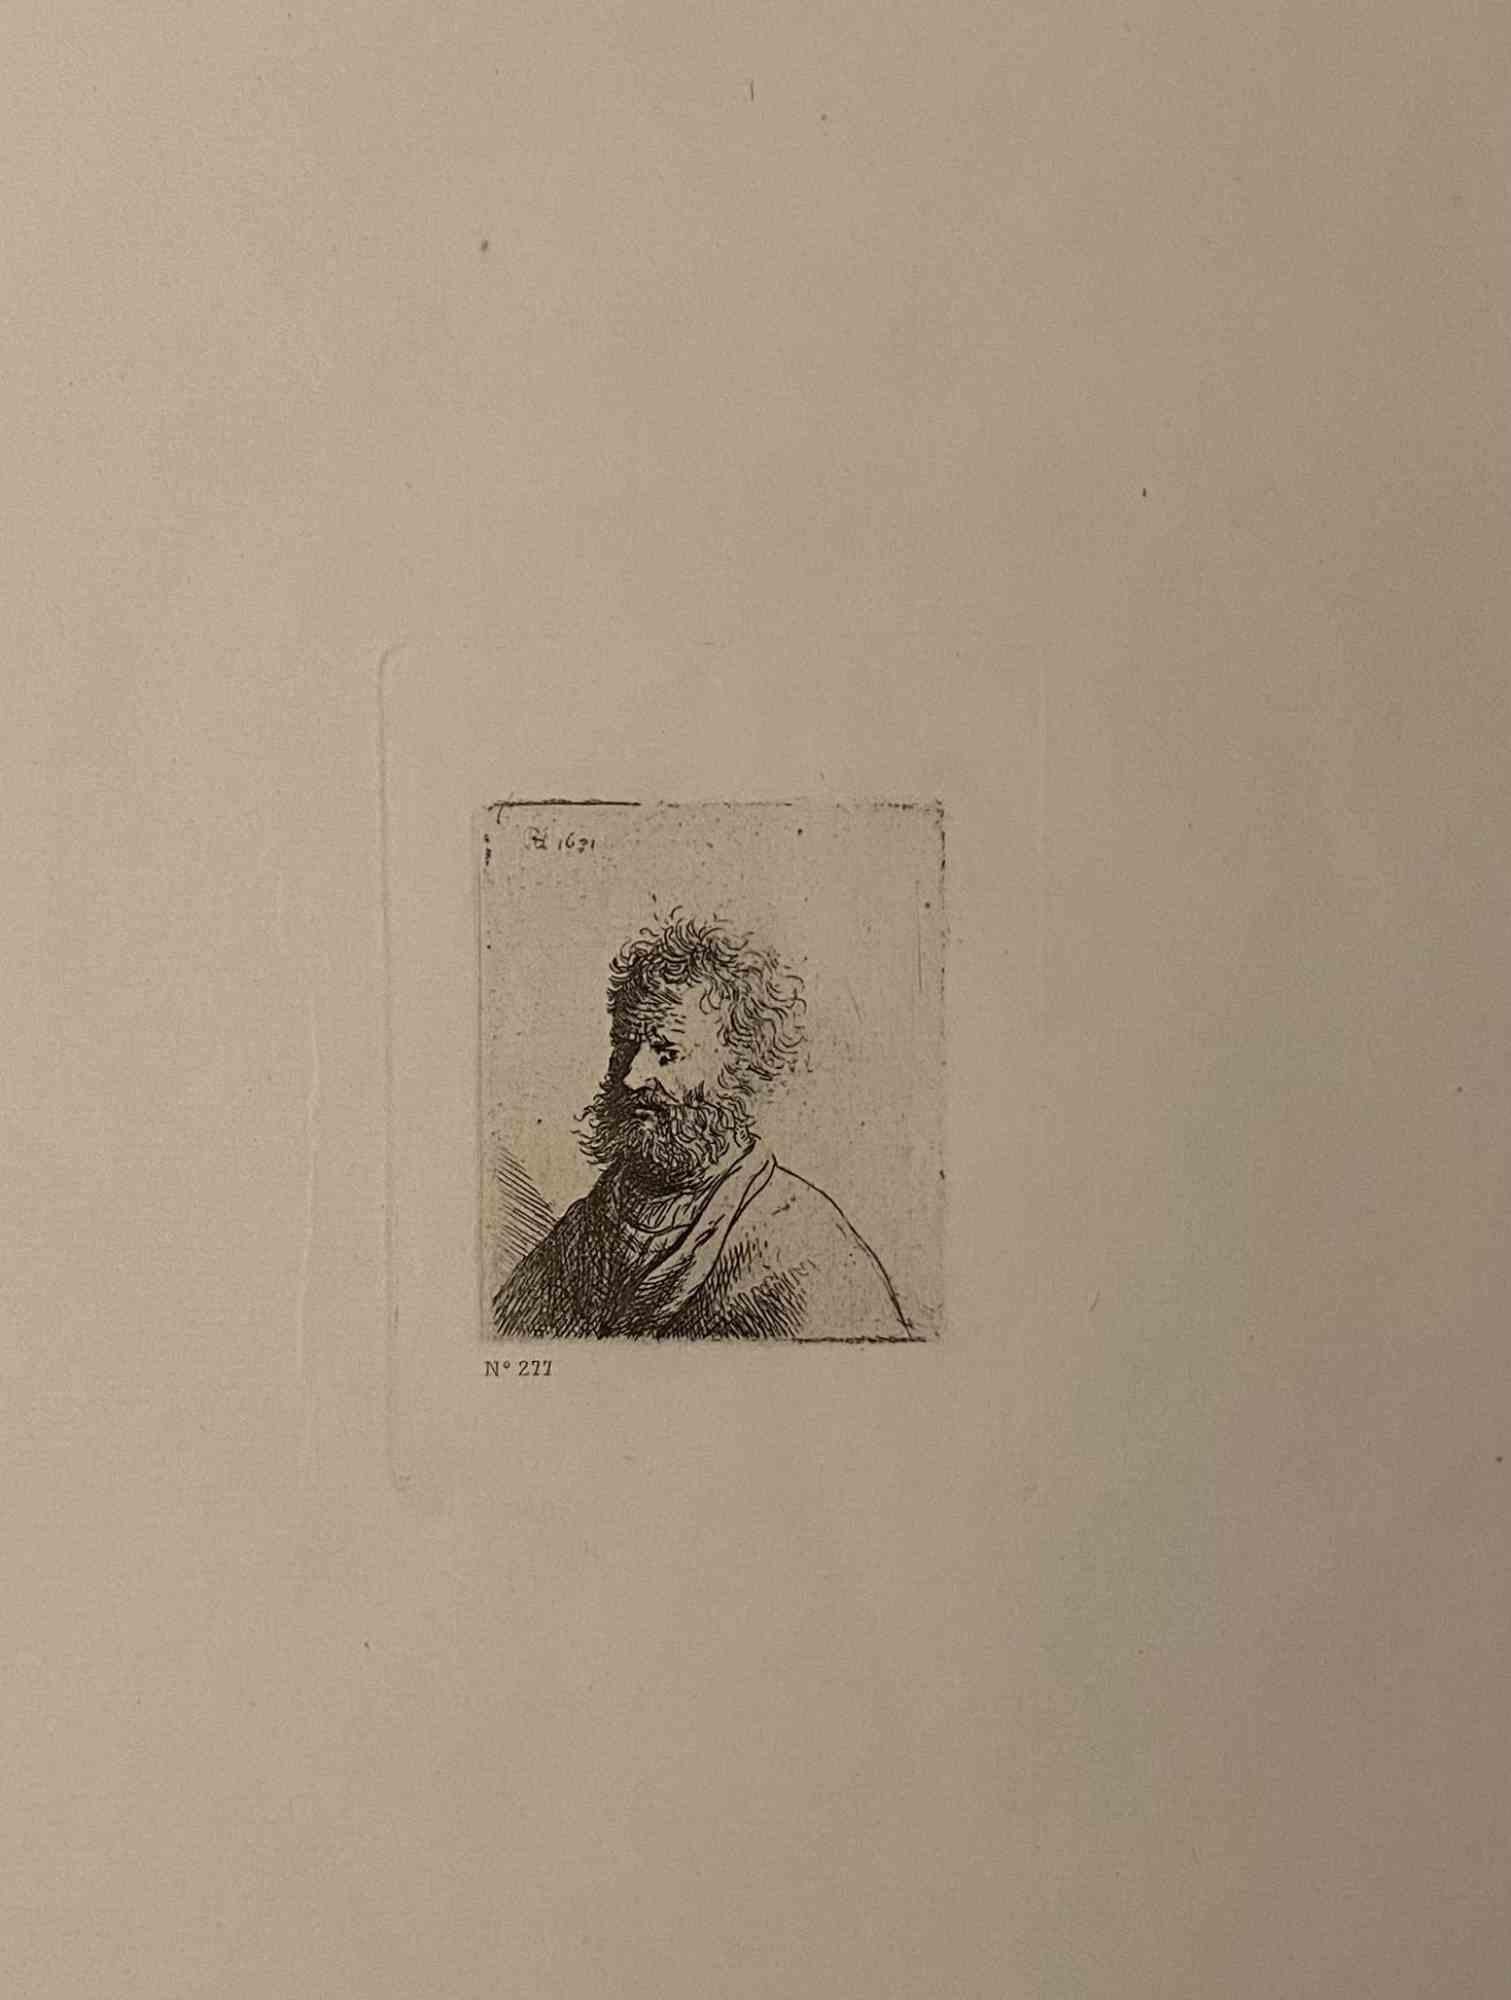 Charles Amand Durand Portrait Print - Bust of an Old Man with Curly Hair- Engraving after Rembrandt - 19th Century